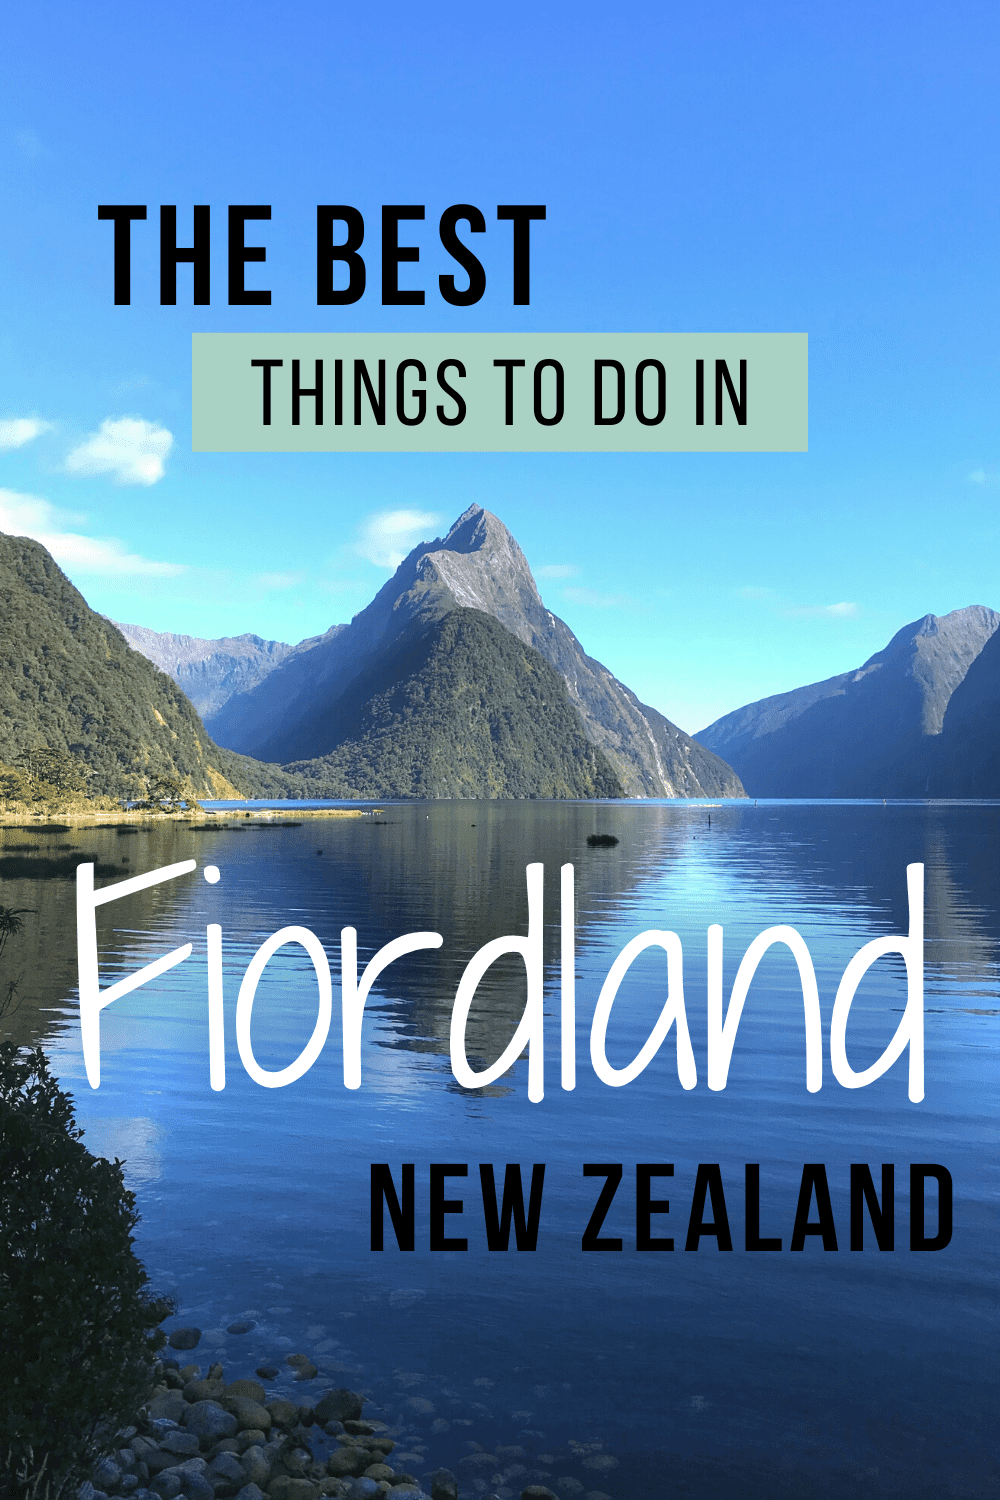 The Best Of Fiordland National Park